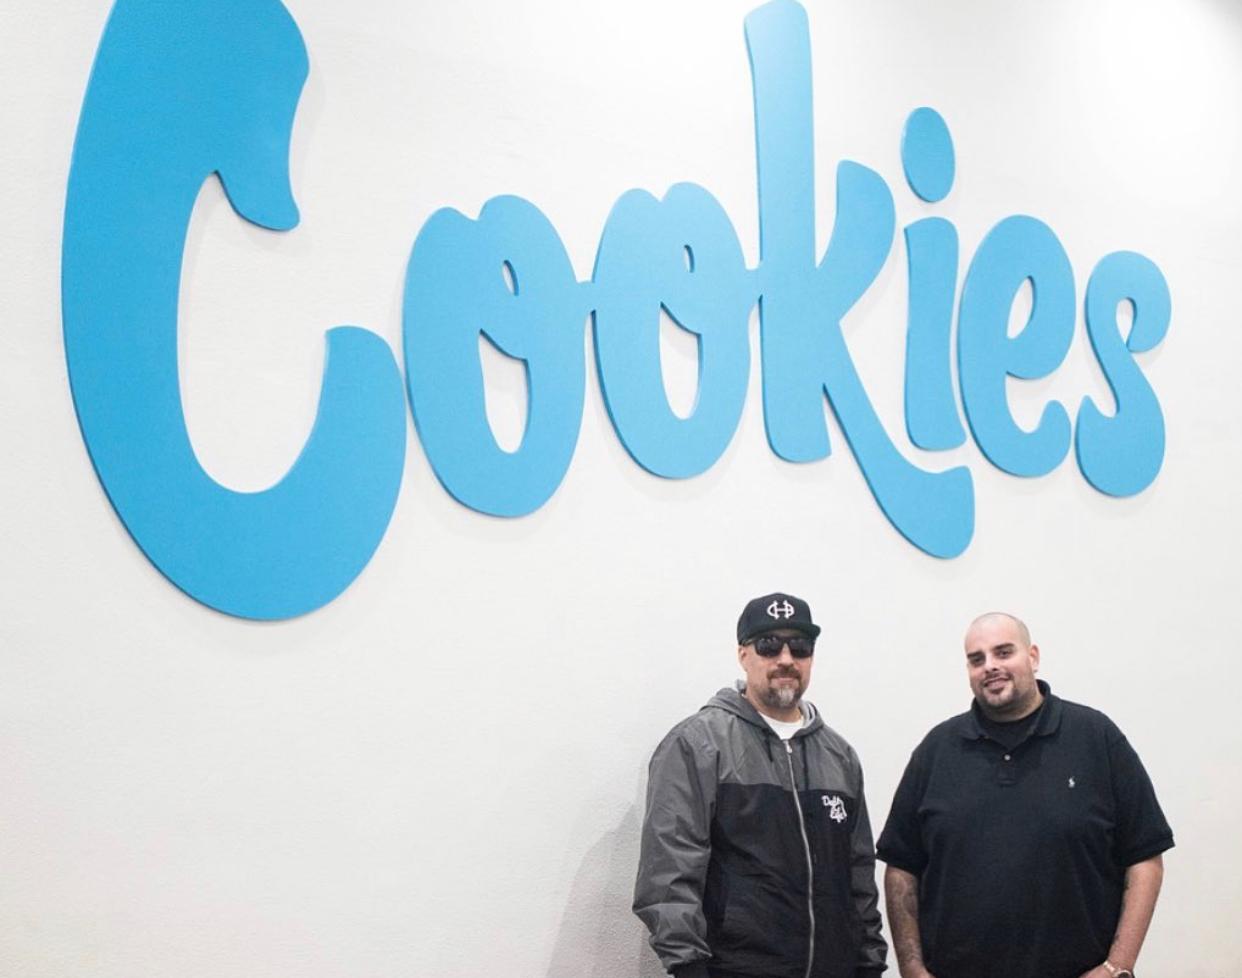 official cookies store